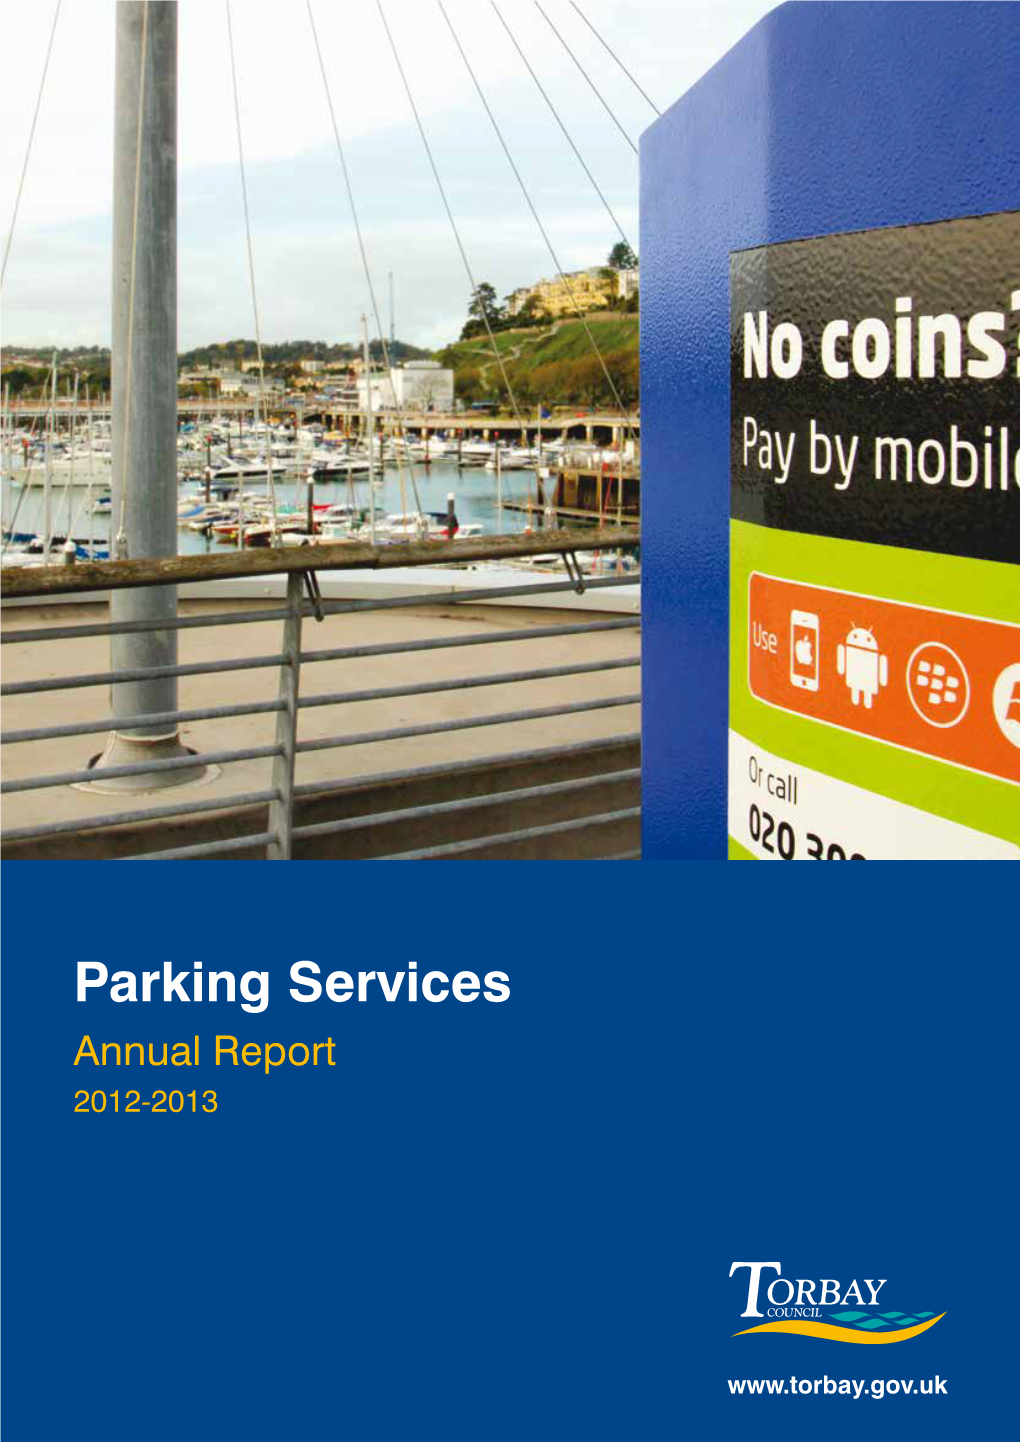 Parking Services Annual Report 2012-2013